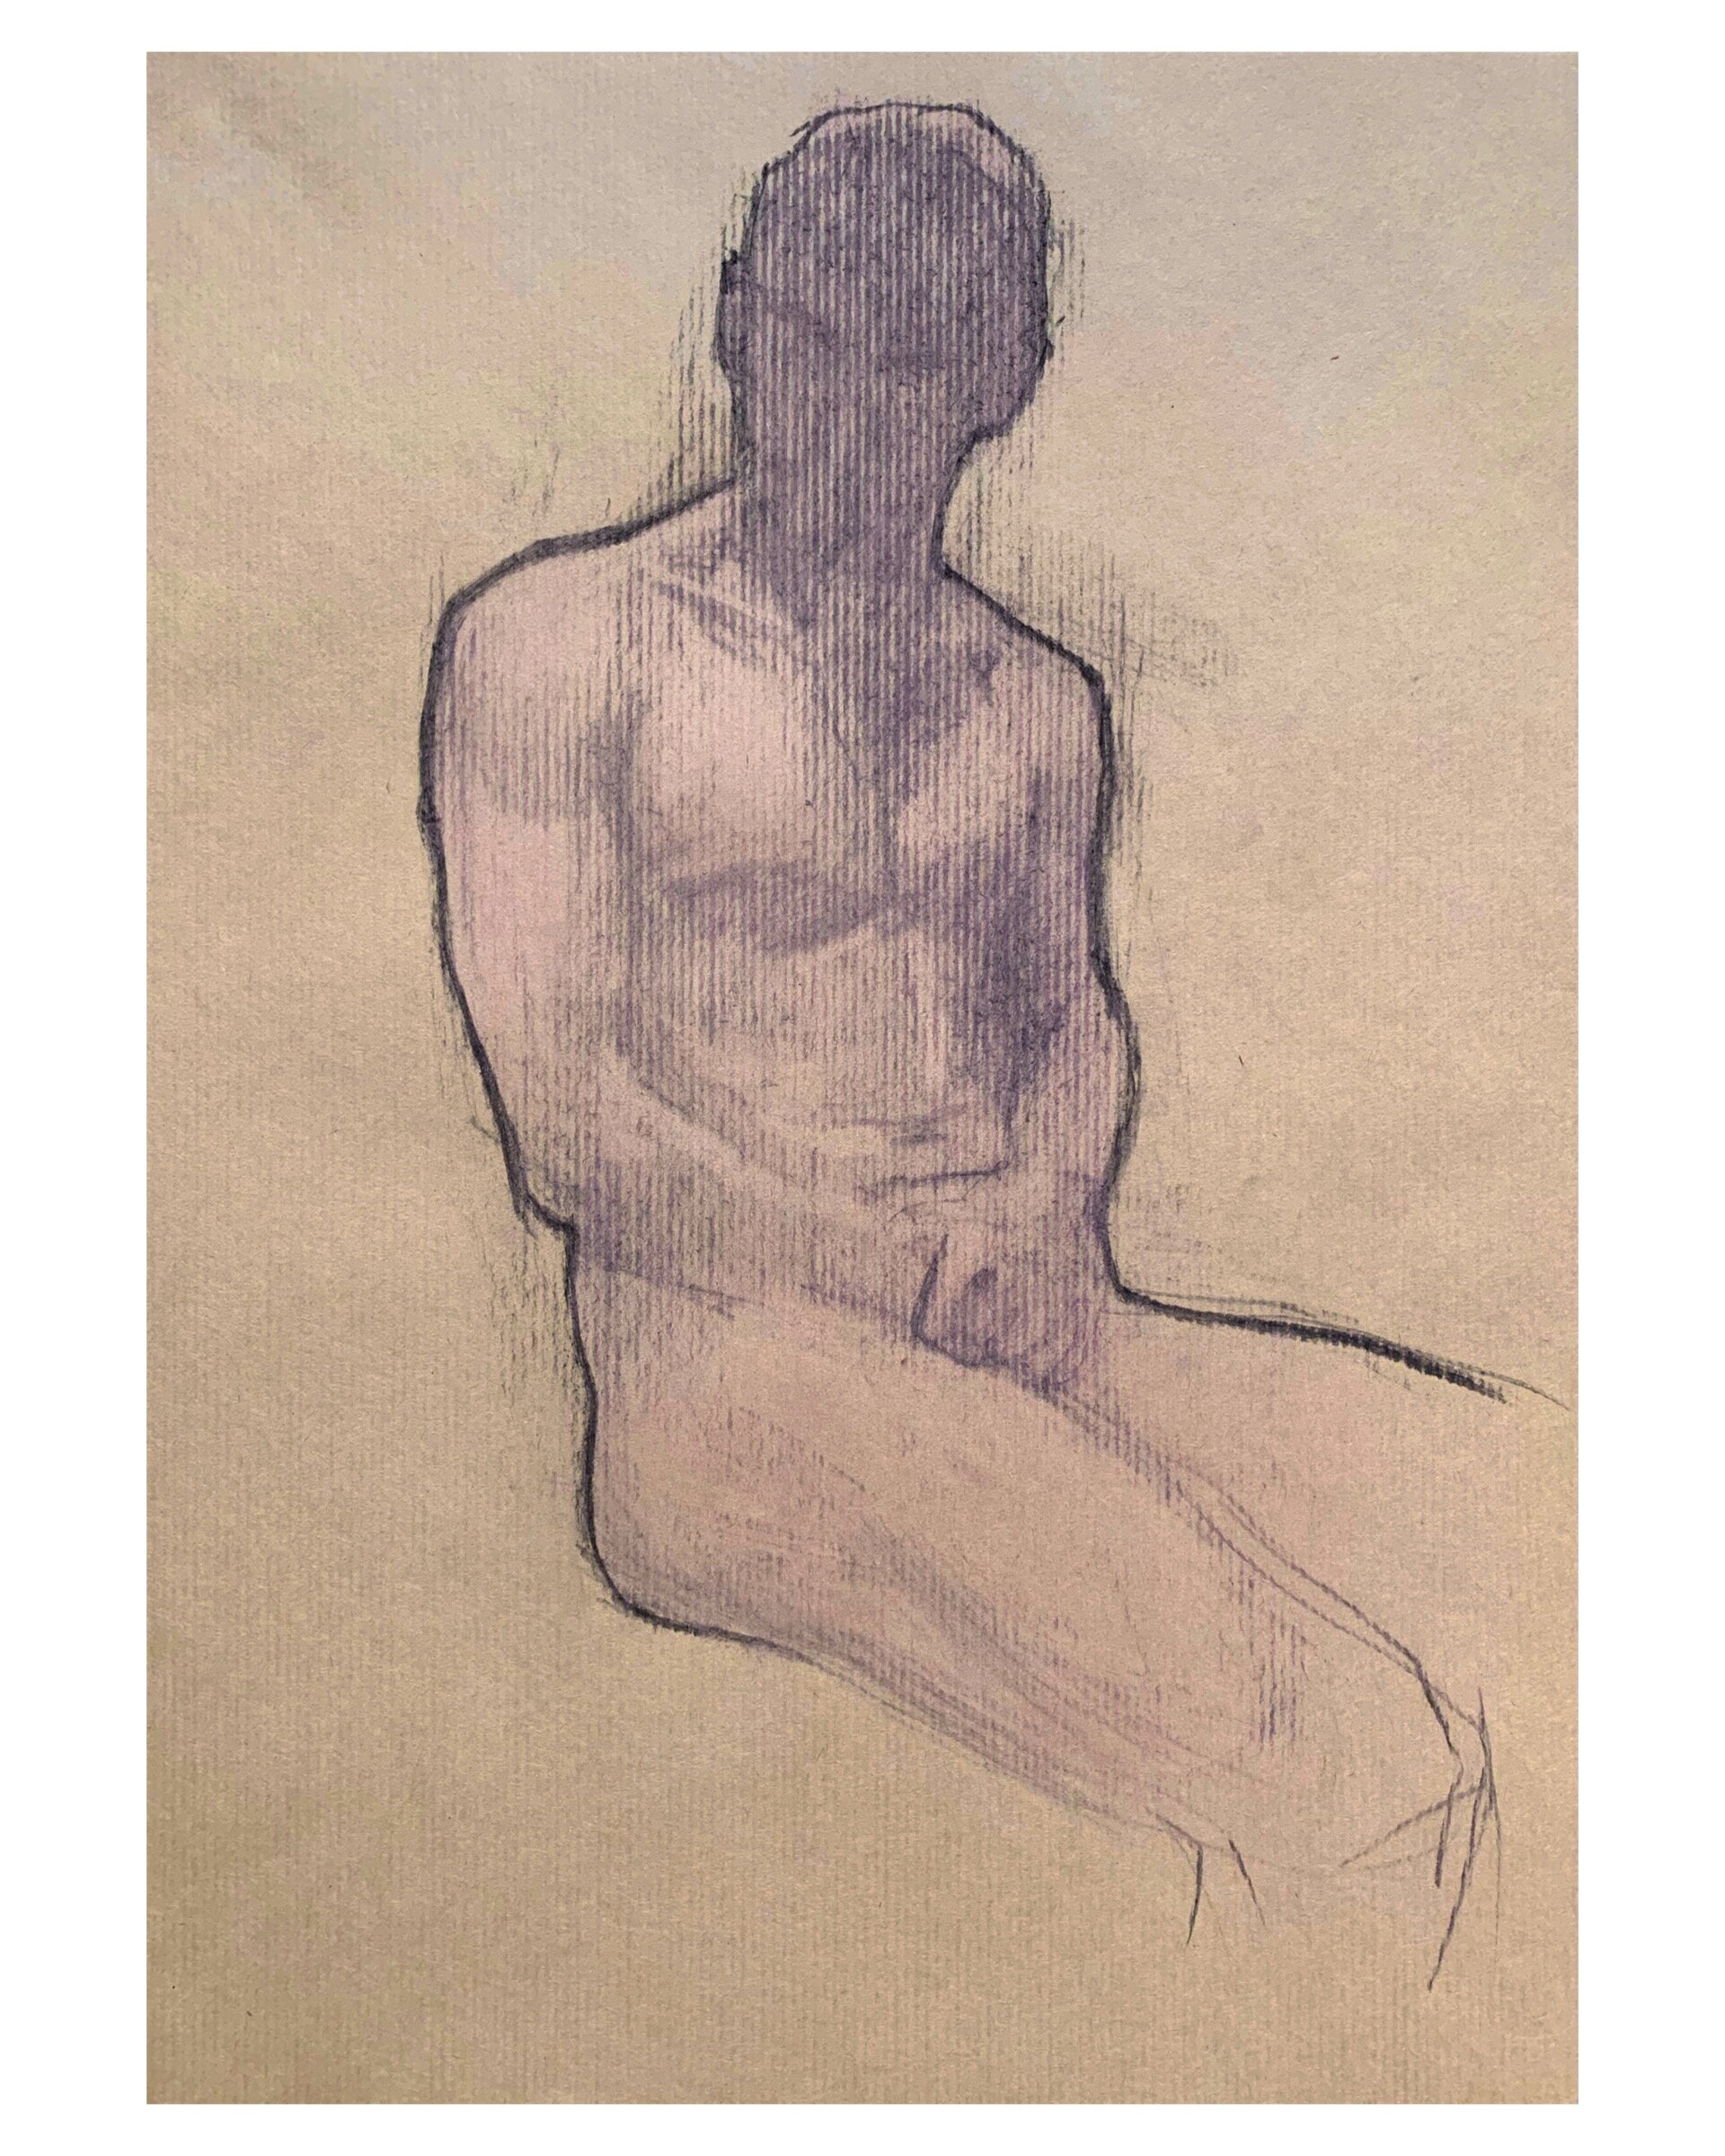   Victor 27 , charcoal and colored pencil on kraft paper, 42x28cm 